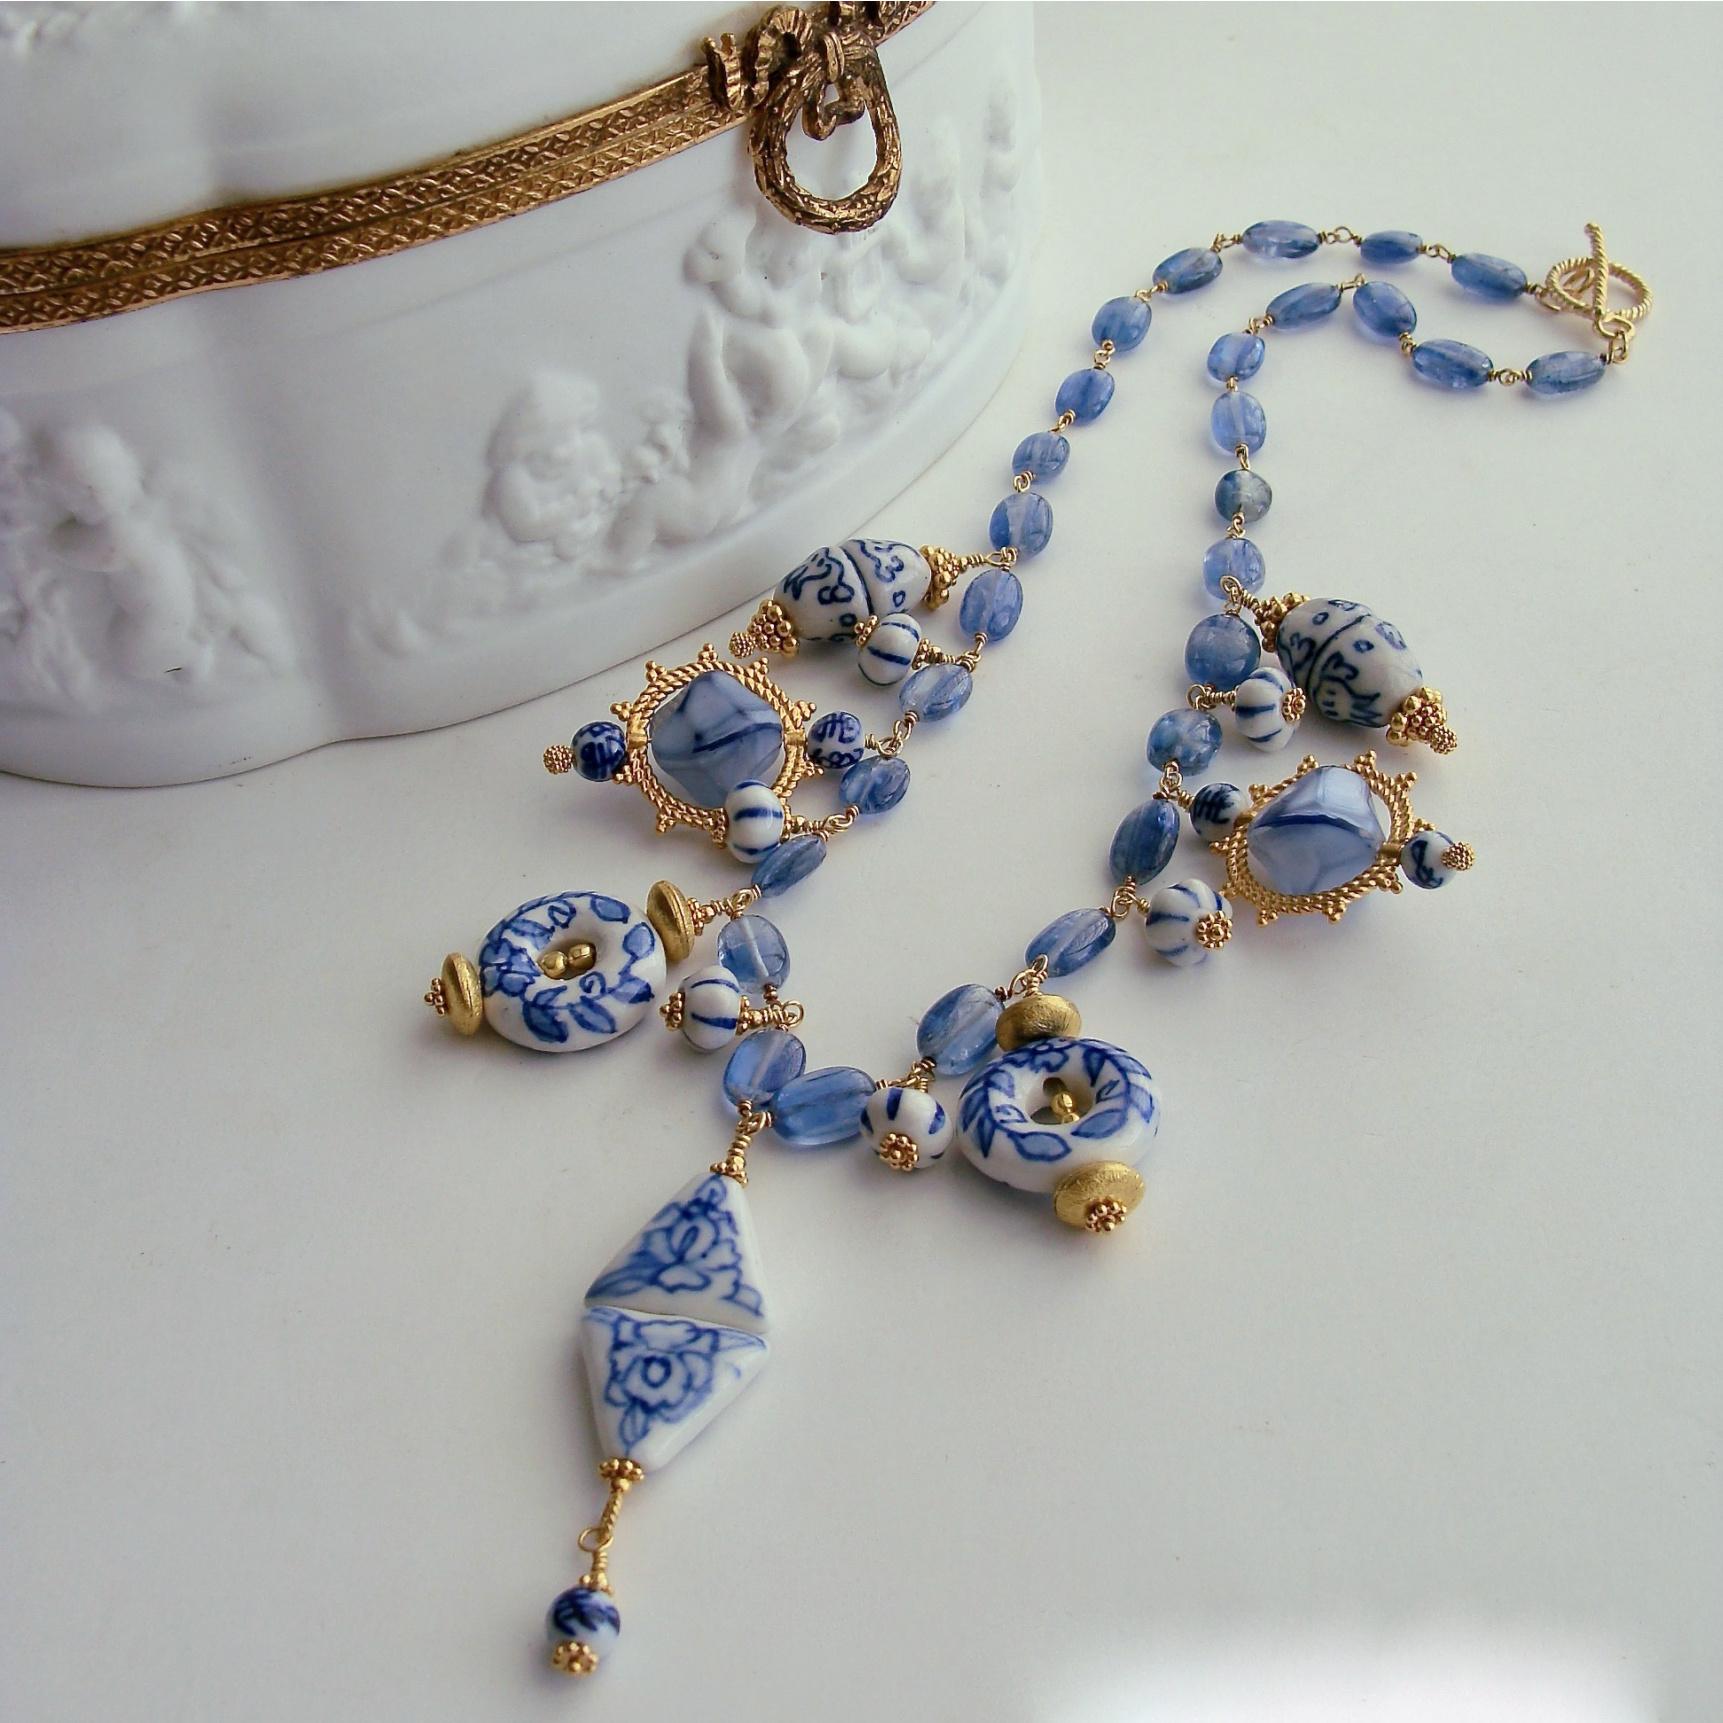 Artisan Kyanite Blue White Porcelain Bead Charm Necklace, Bluebelle II Necklace